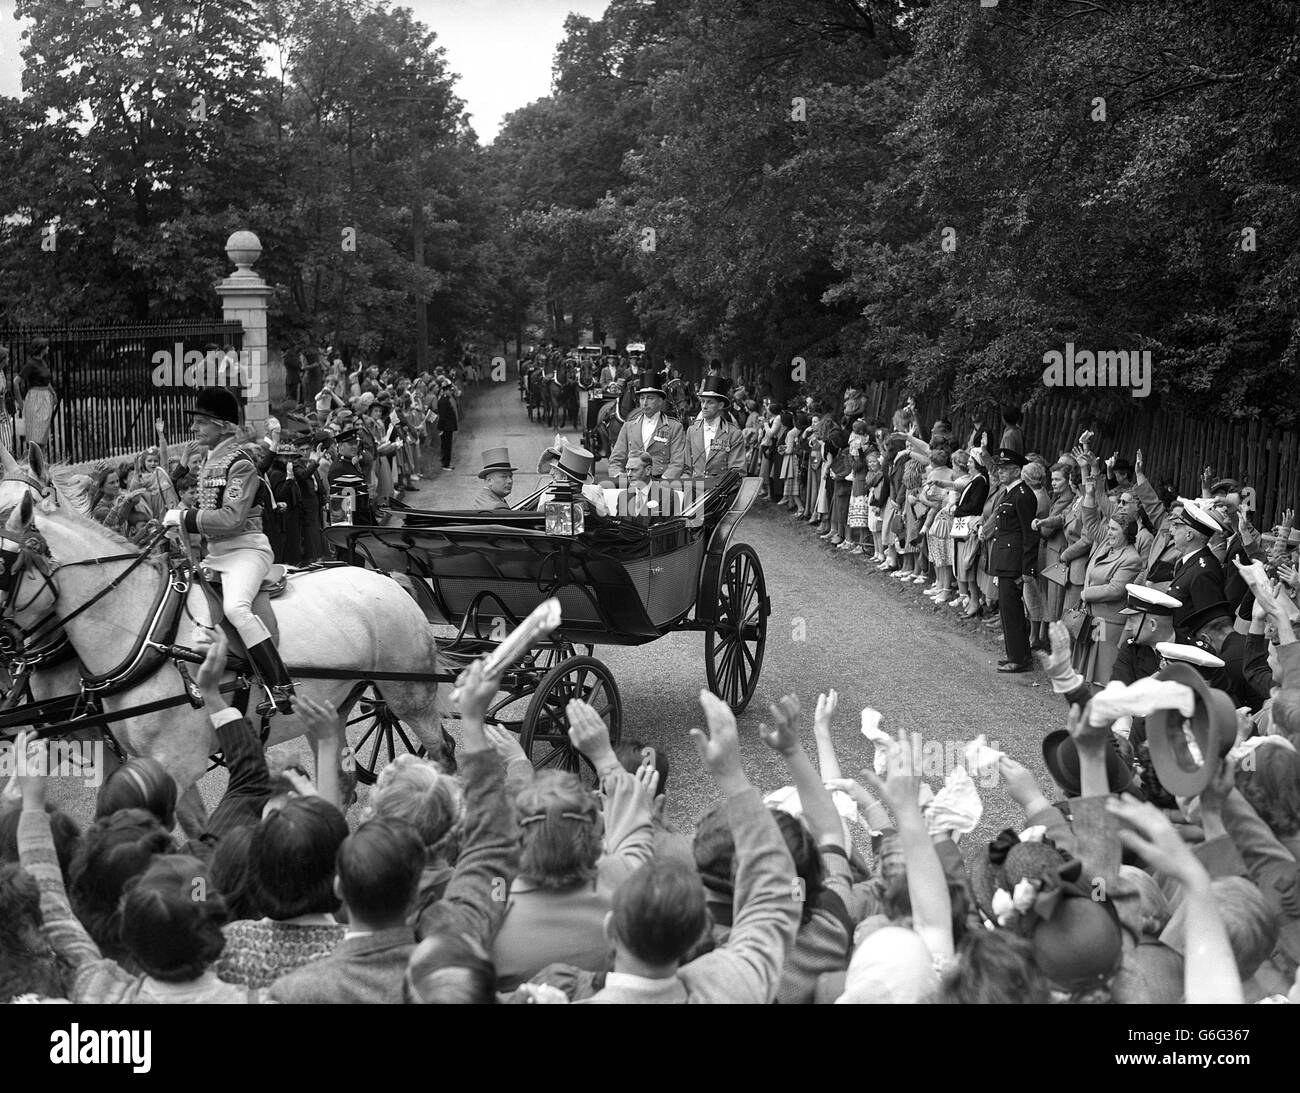 Royalty - King George VI and the Queen Consort at Ascot Stock Photo